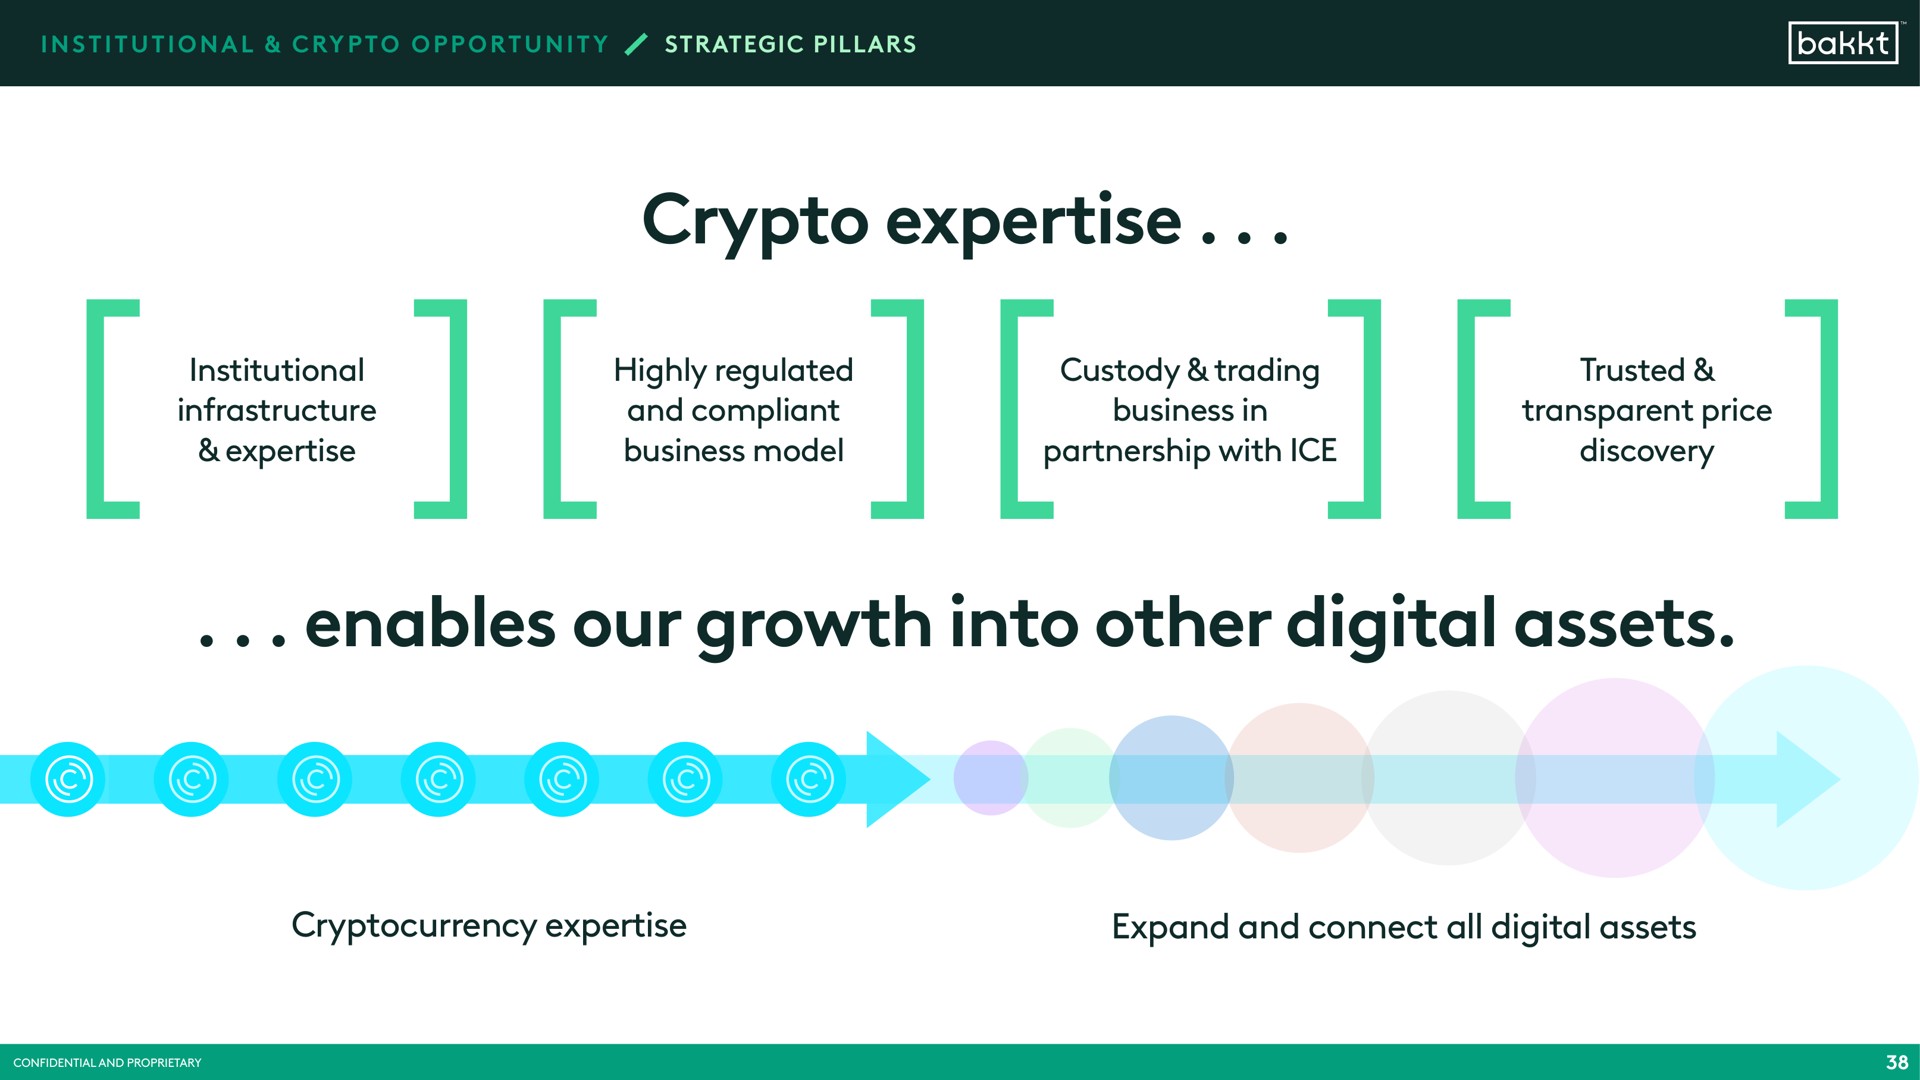 enables our growth into other digital assets expand and connect all digital assets | Bakkt